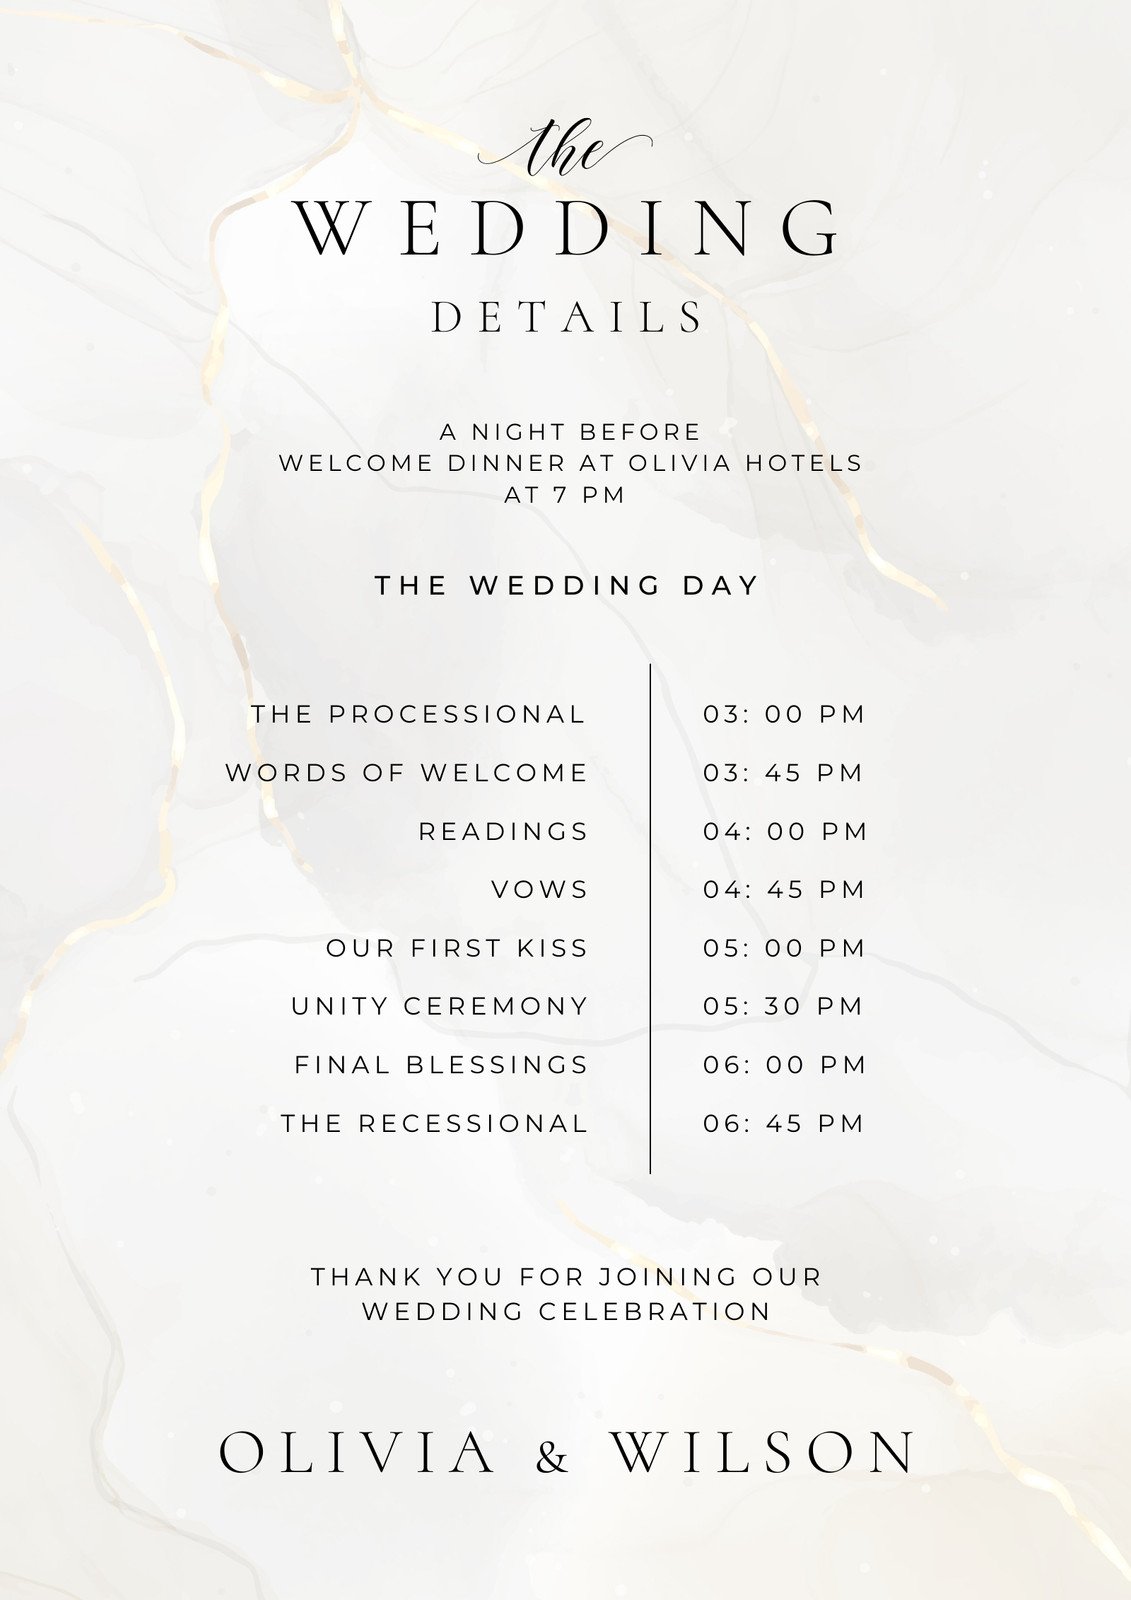 FREE Bridal Shower Itinerary Template Plan Your Perfect Shower With Ease 